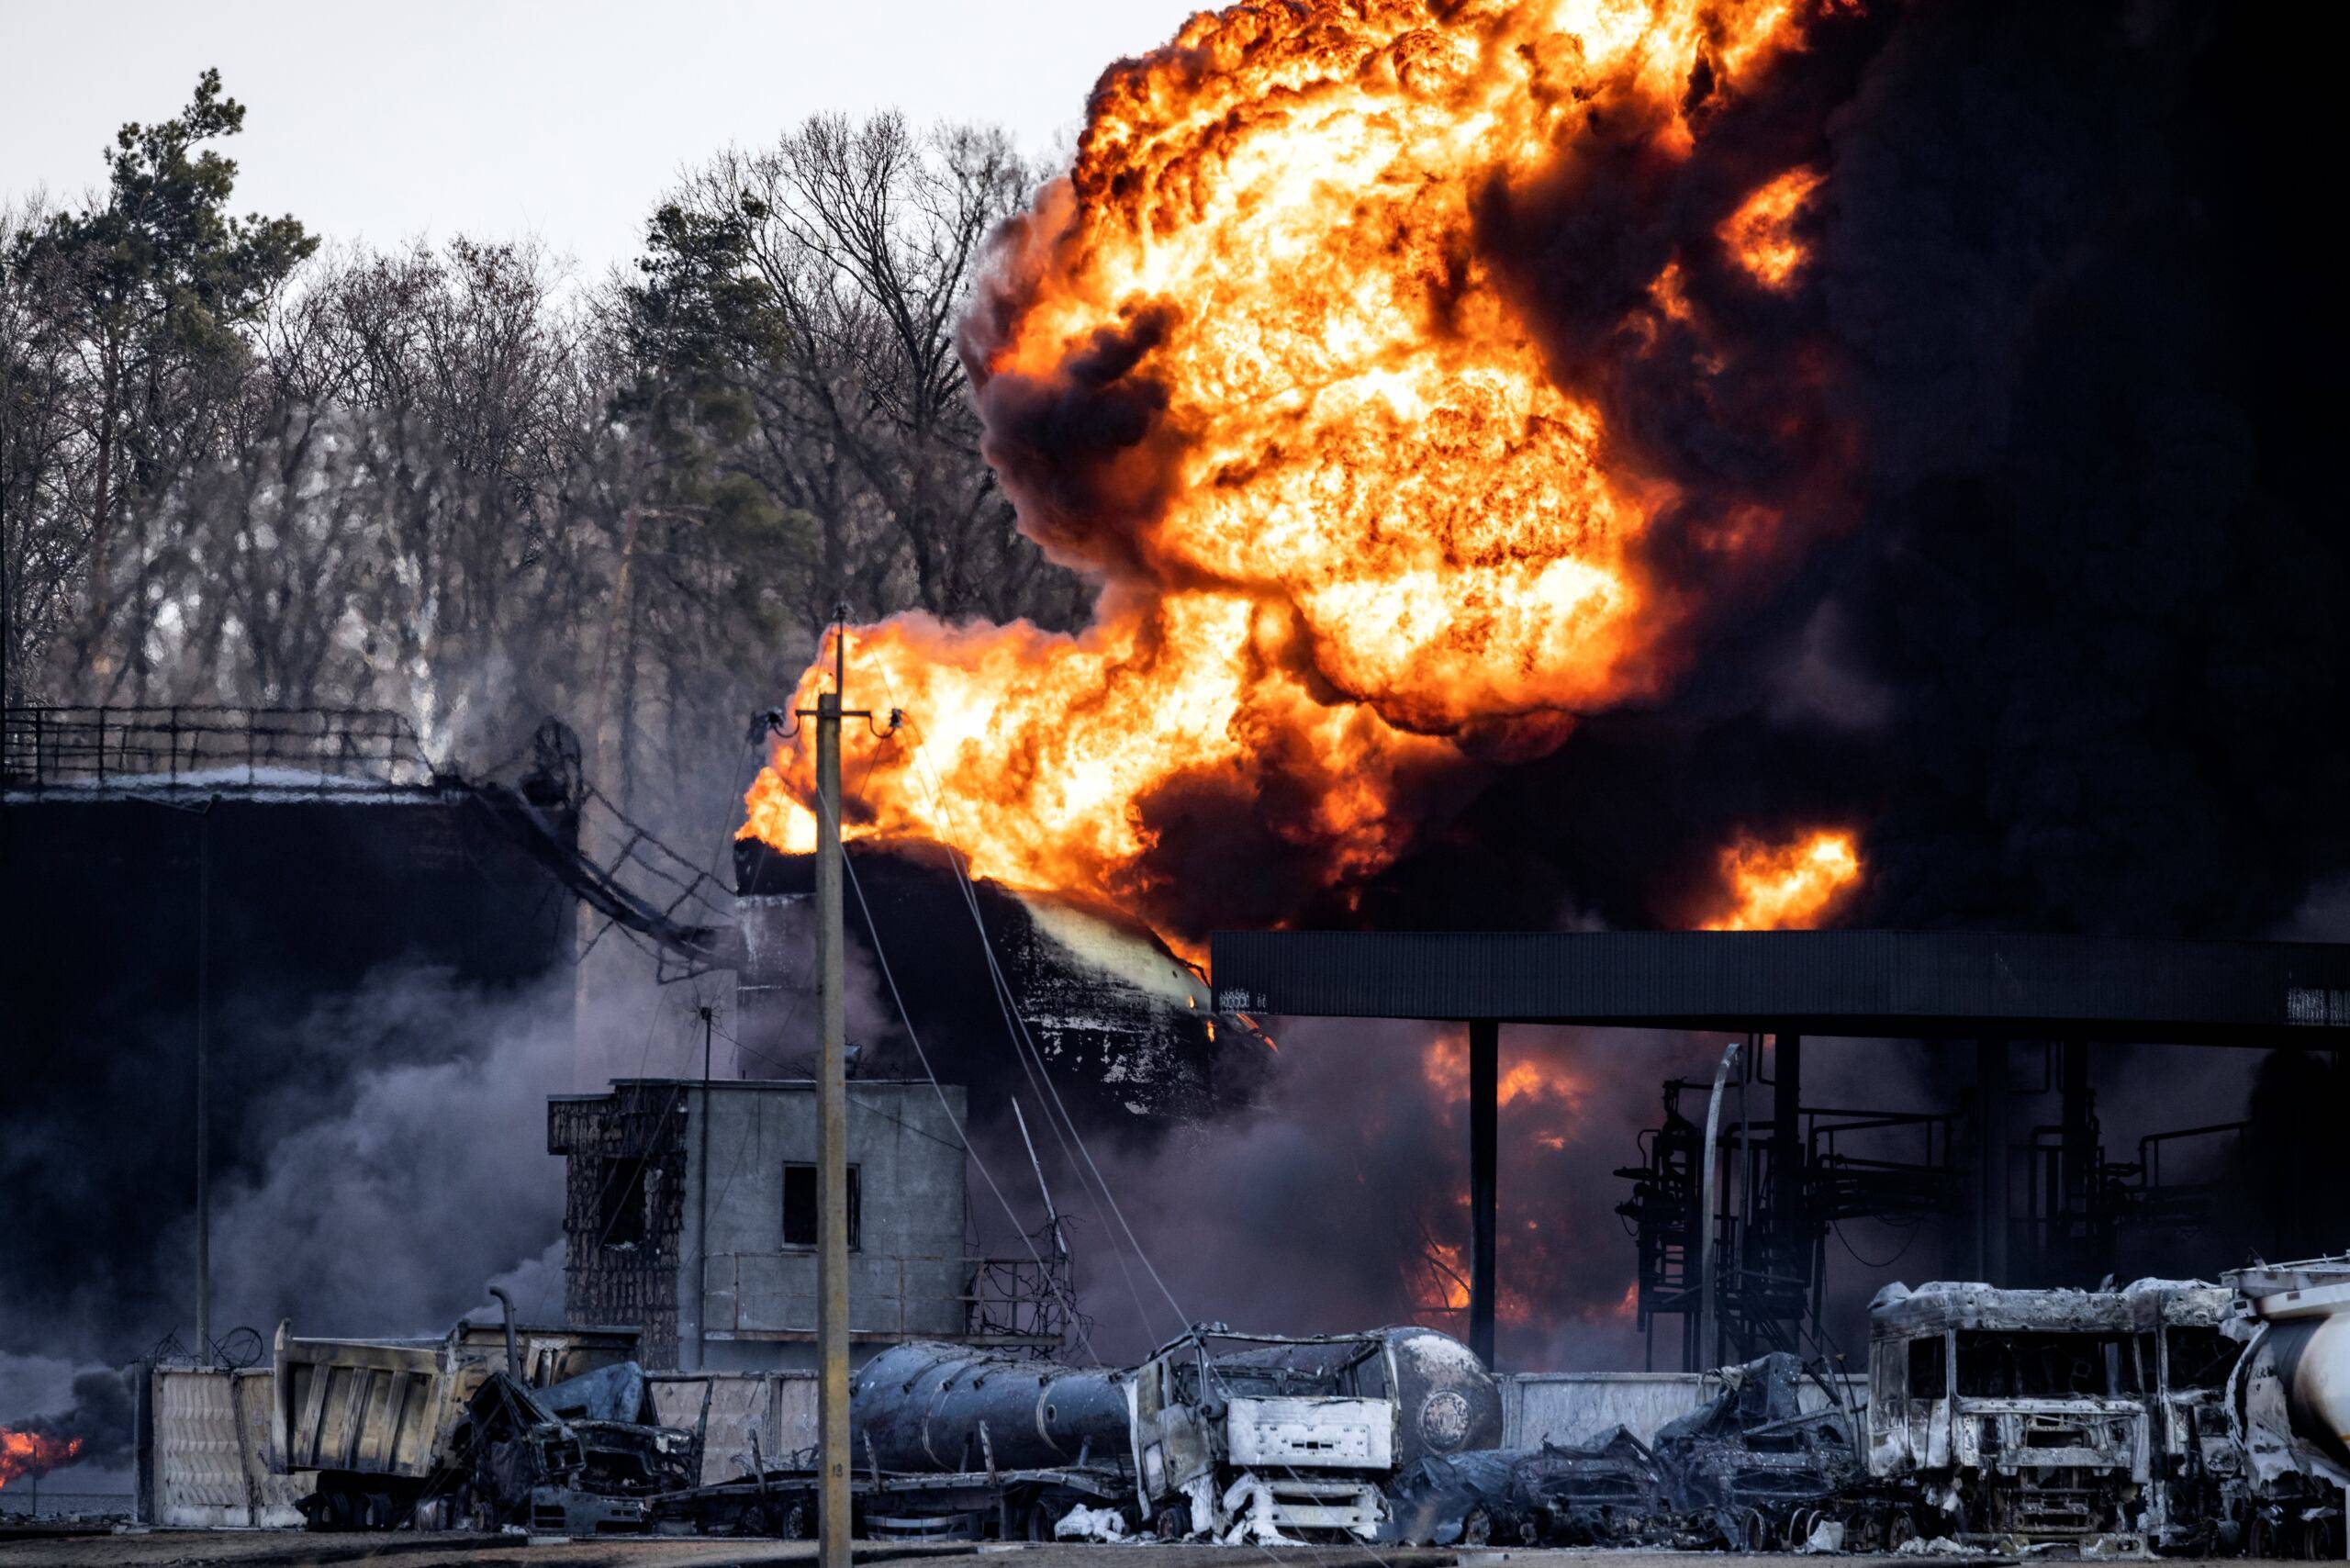 A fuel storage facility burns after Russian attacks in the city of Kalynivka, on March 25, 2022. (Photo by FADEL SENNA / AFP)